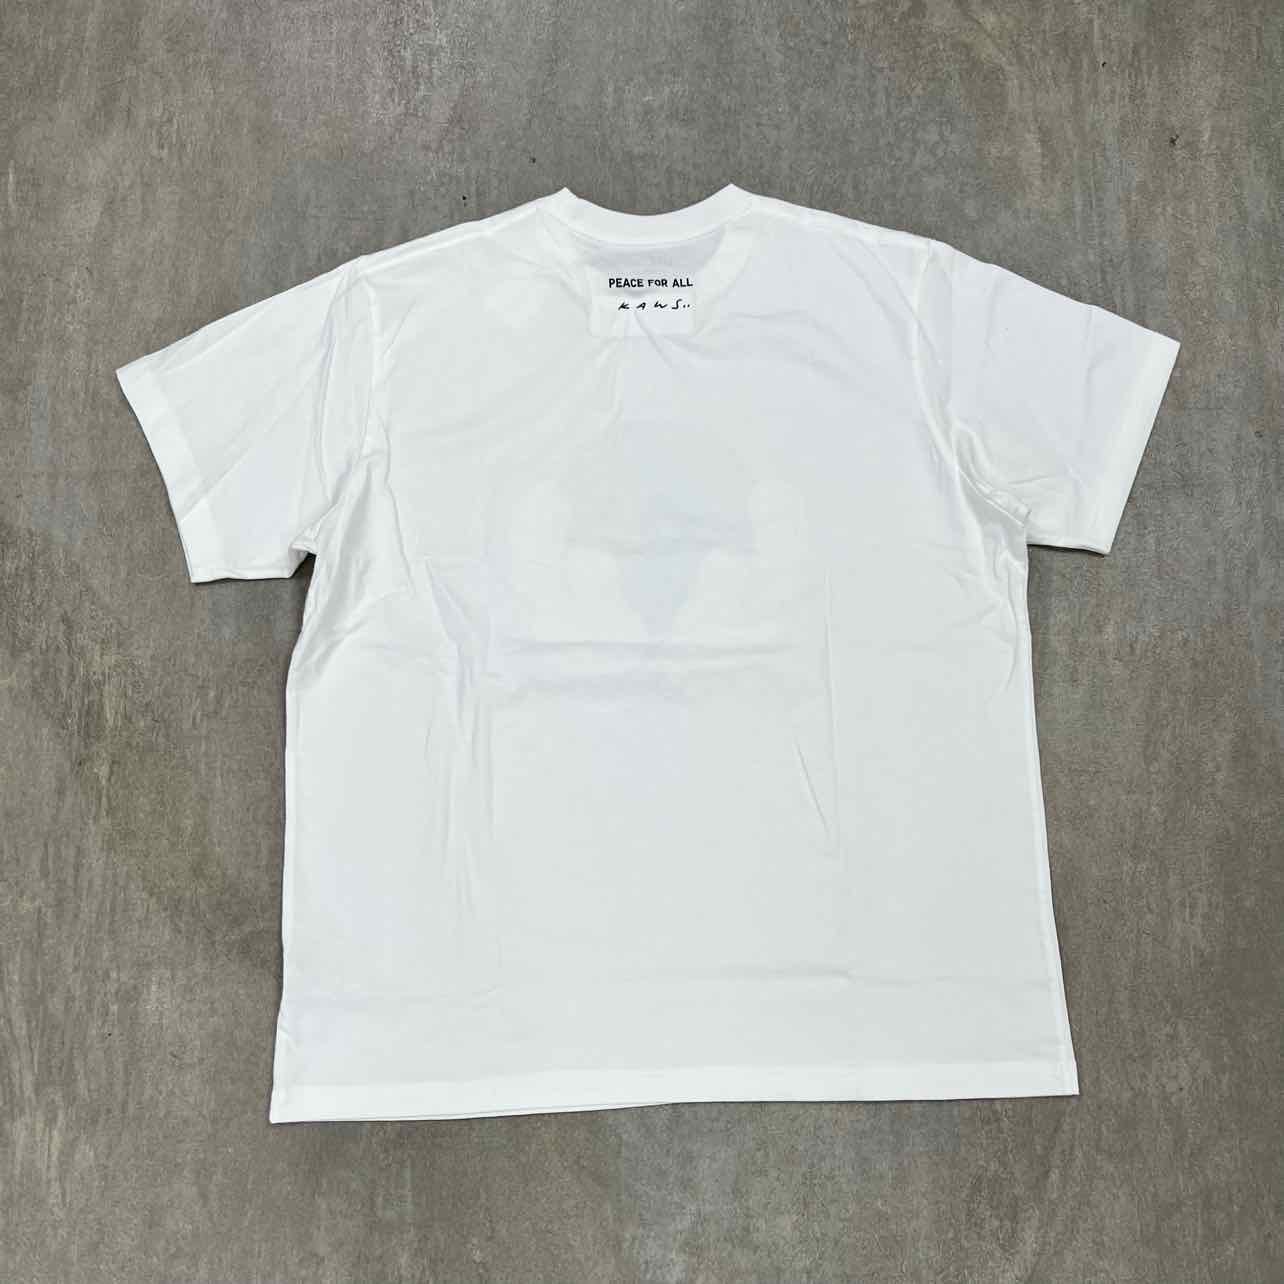 Uniqlo T-Shirt &quot;KAWS PEACE FOR ALL&quot; White New Size 2XL